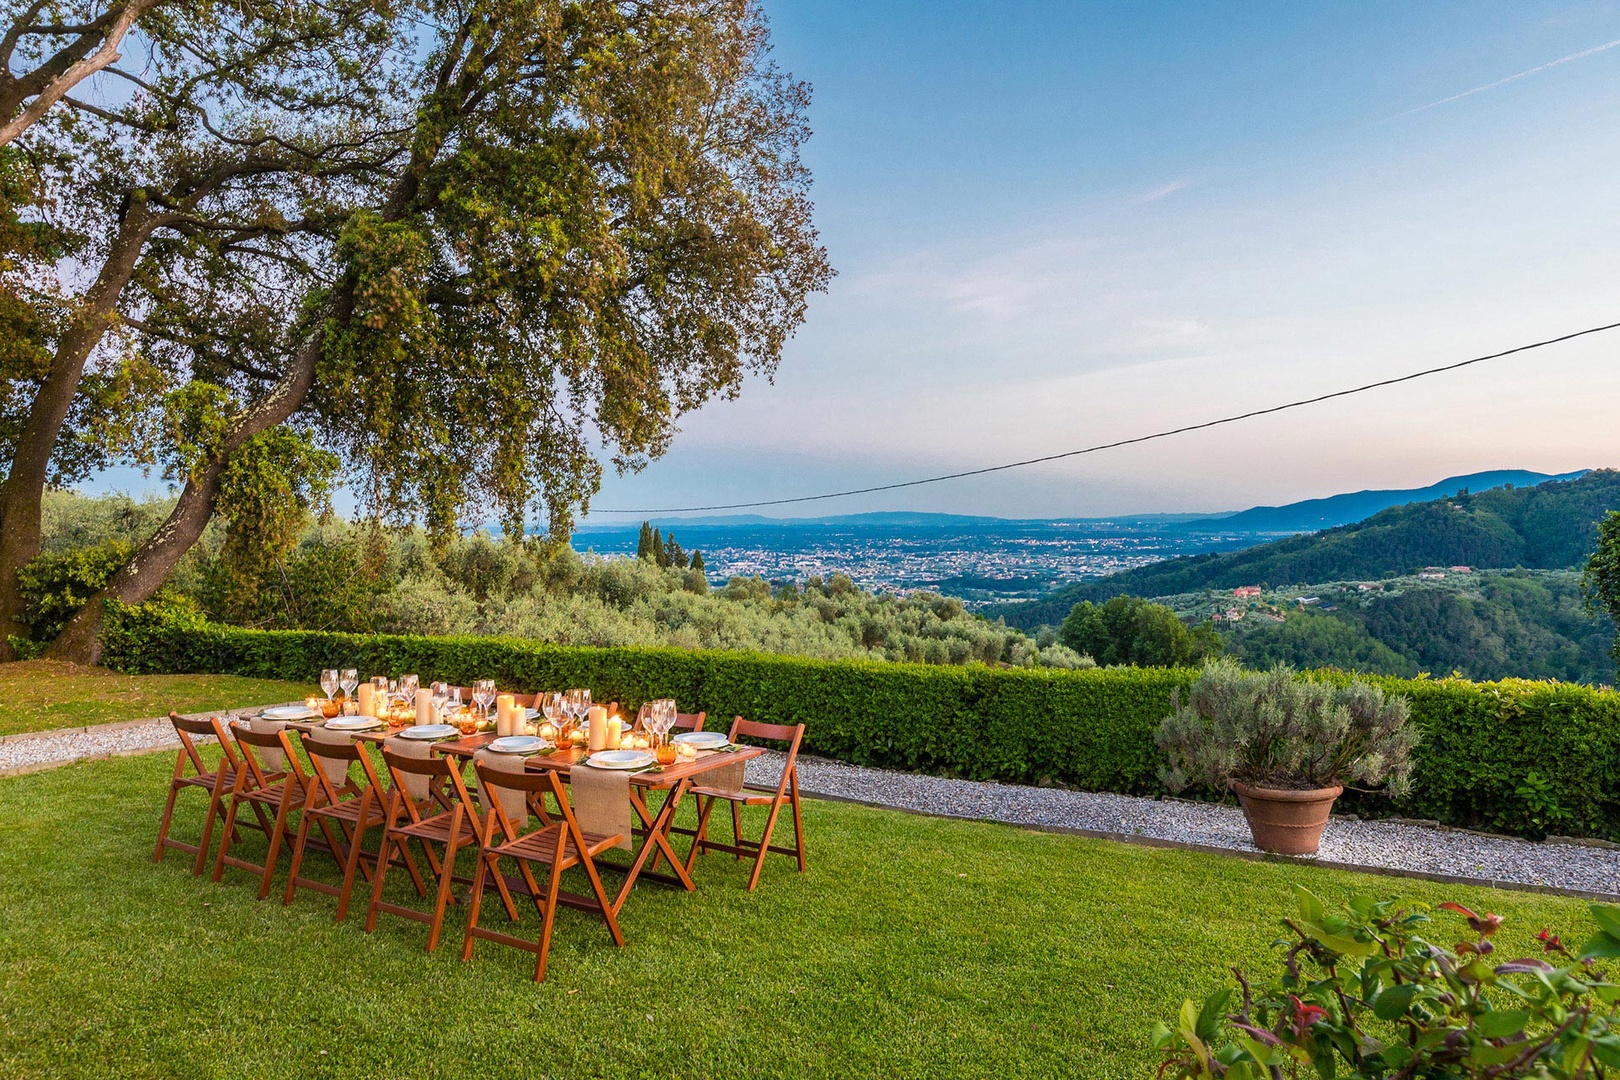 Gather around the table on the terrace behind the house with views of Montecatini in the background.